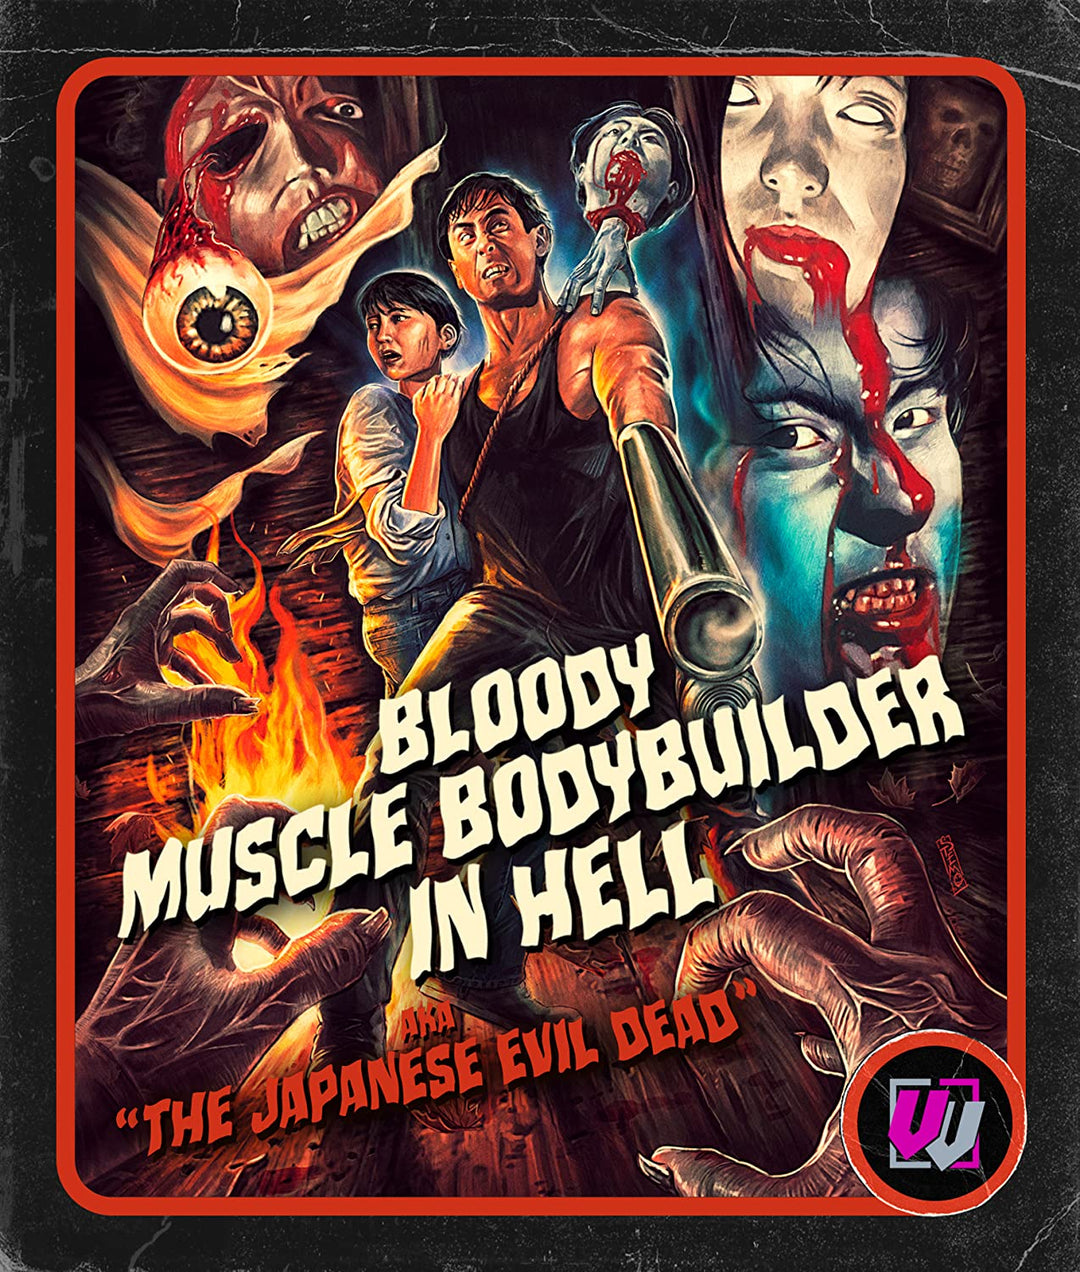 Bloody Muscle Body Builder In Hell [visual Vengeance Collector's Edition] [Blu-ray]